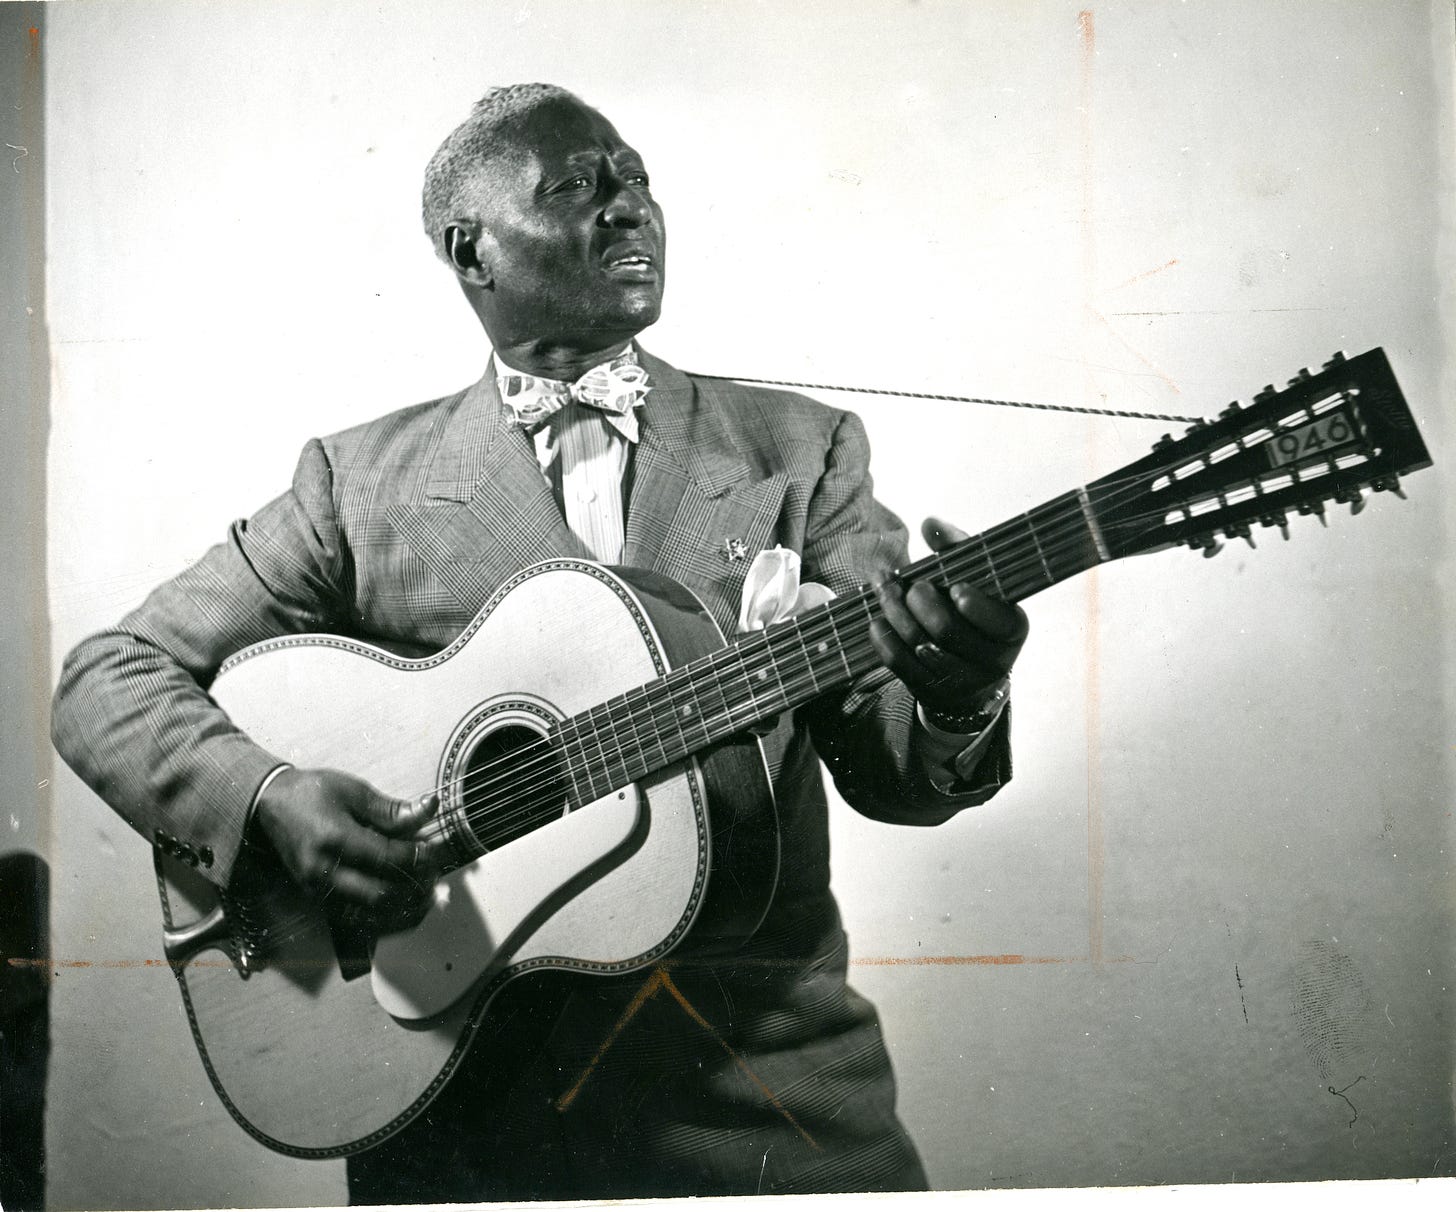 Lead Belly's music defied racial categorization